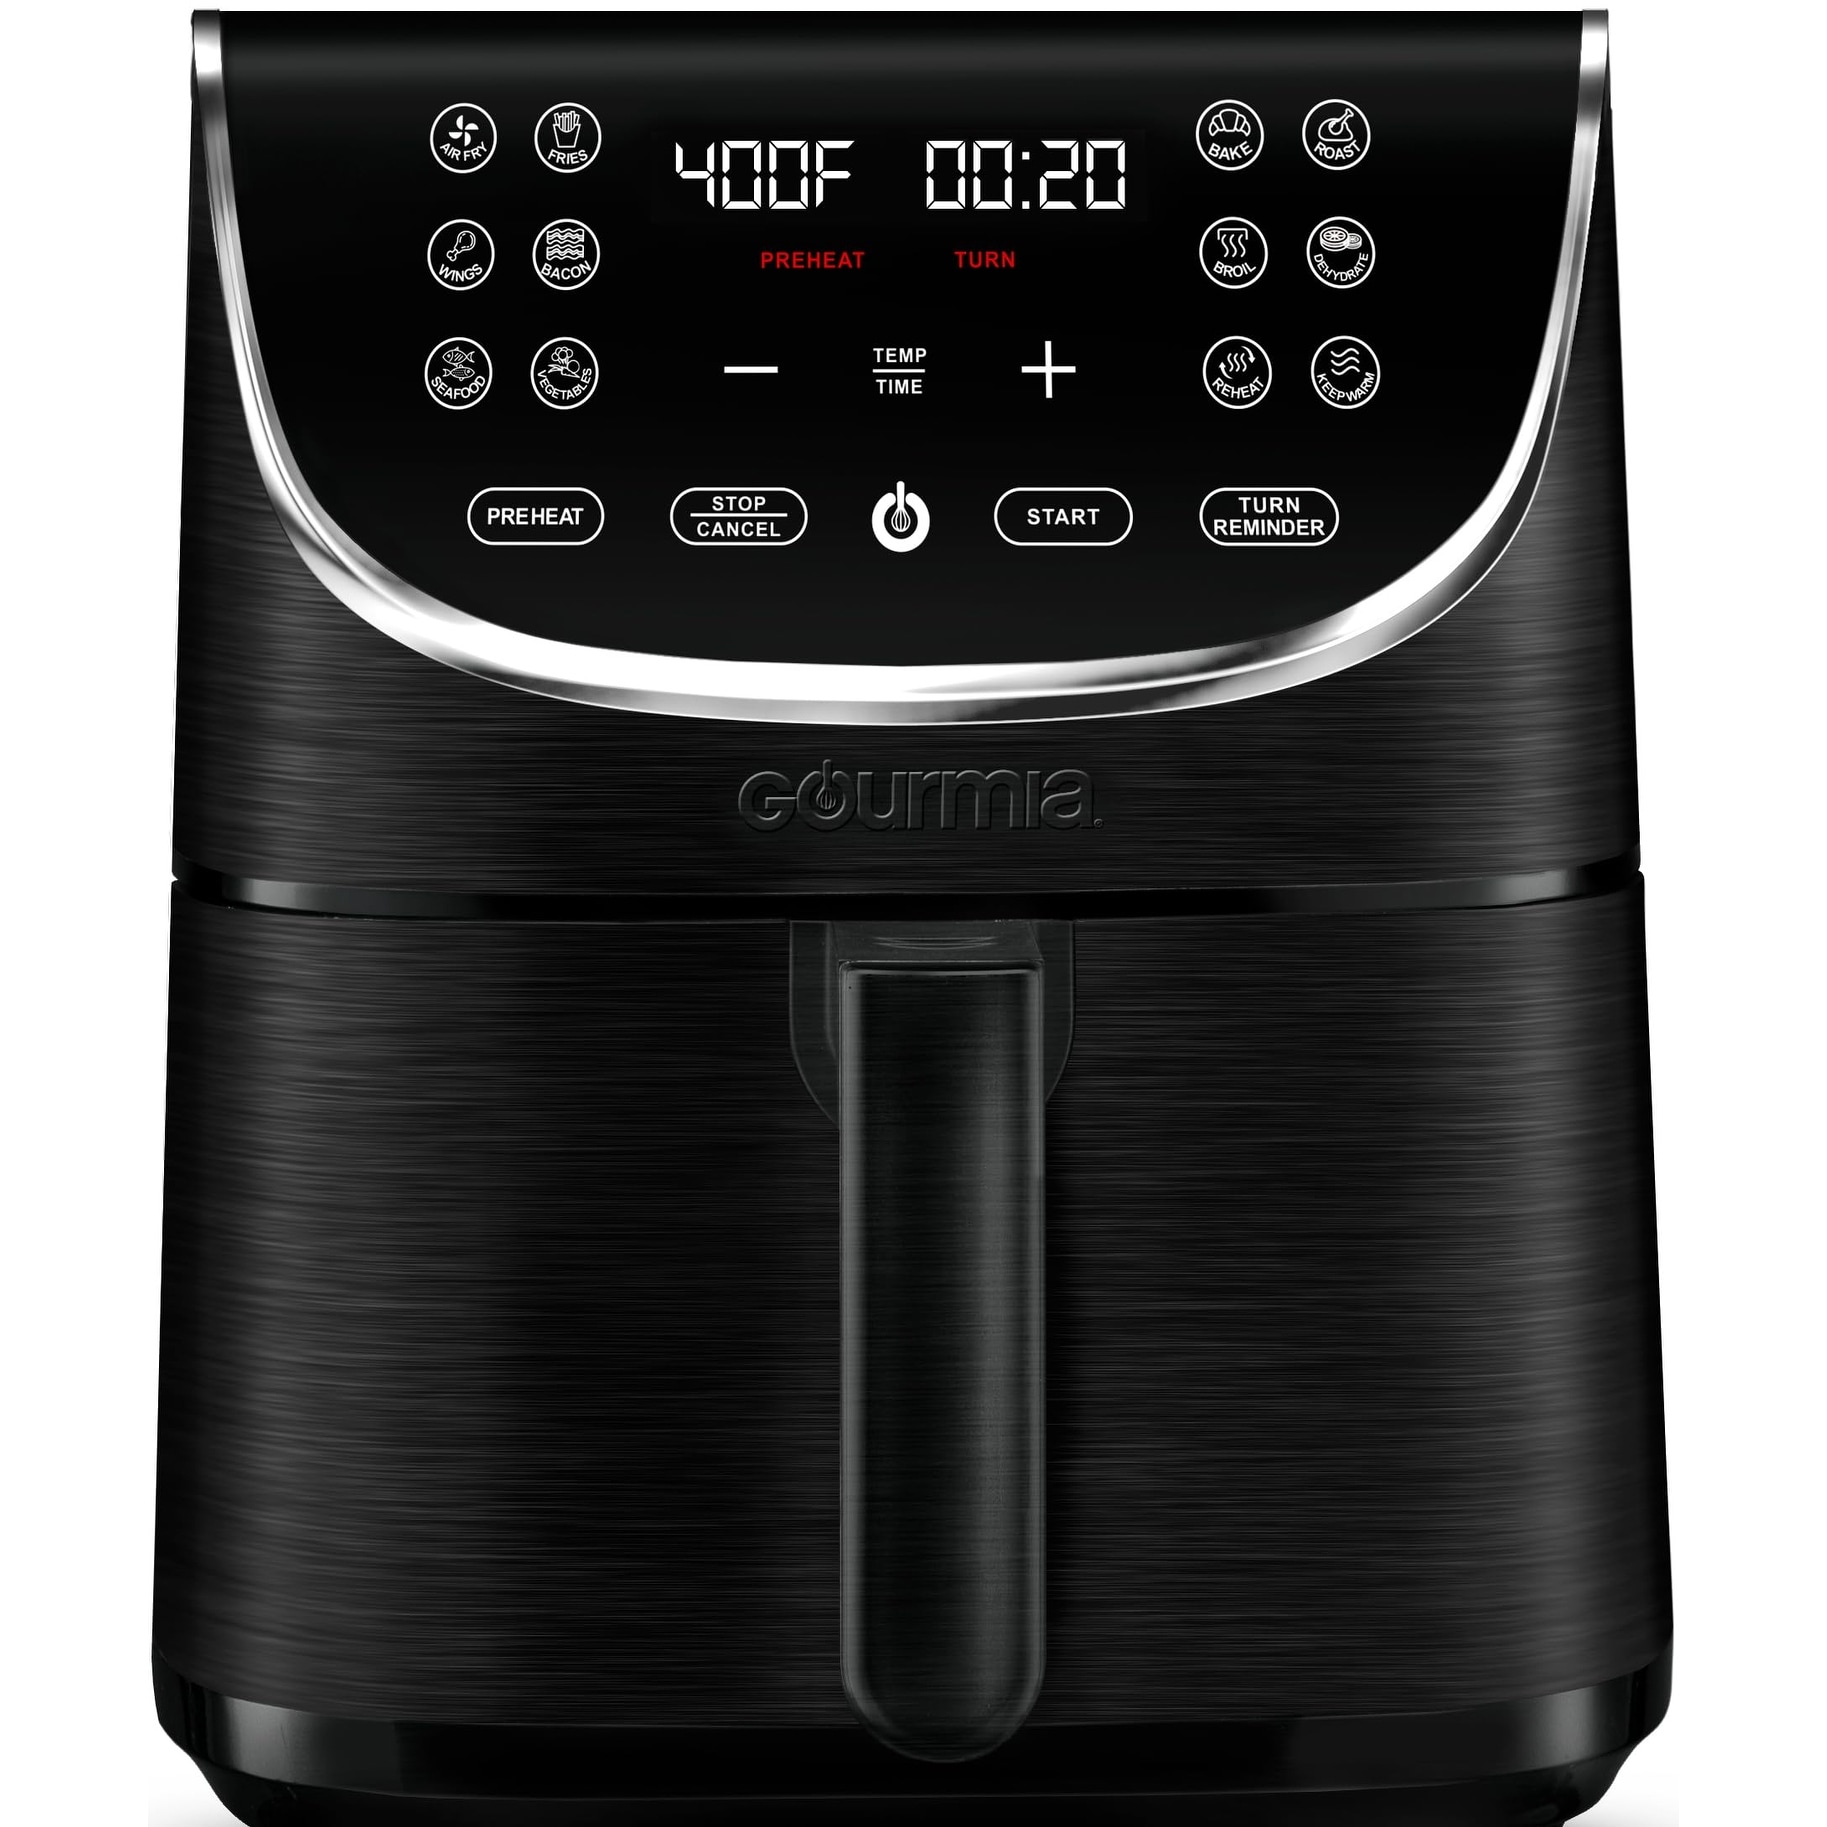 Cuisinart Airfryer, 6-Qt Basket Air Fryer Oven that Roasts, Bakes, Broils &  Air Frys Quick & Easy Meals - Digital Display with 5 Presets, Non Stick 